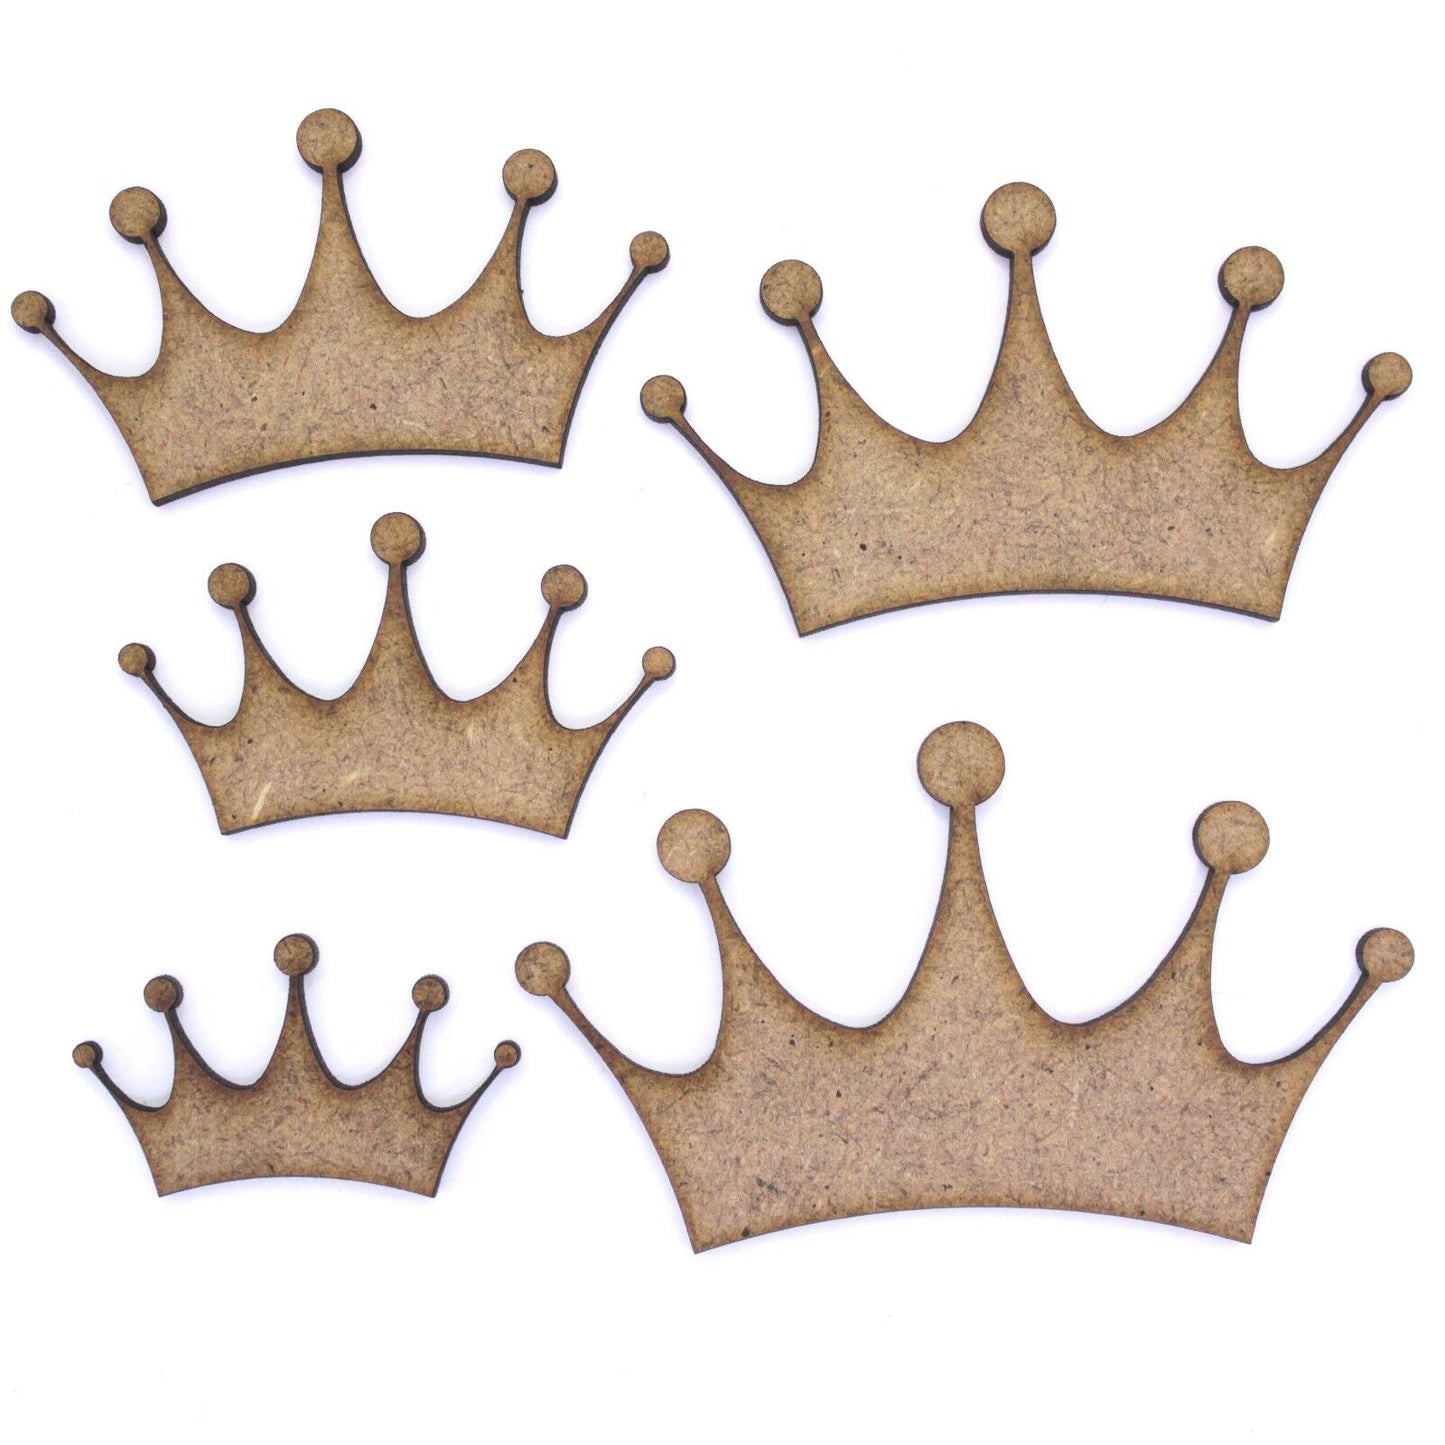 Basic Crown Craft Shape, Various Sizes, 2mm MDF Wood. Royal, King, Queen